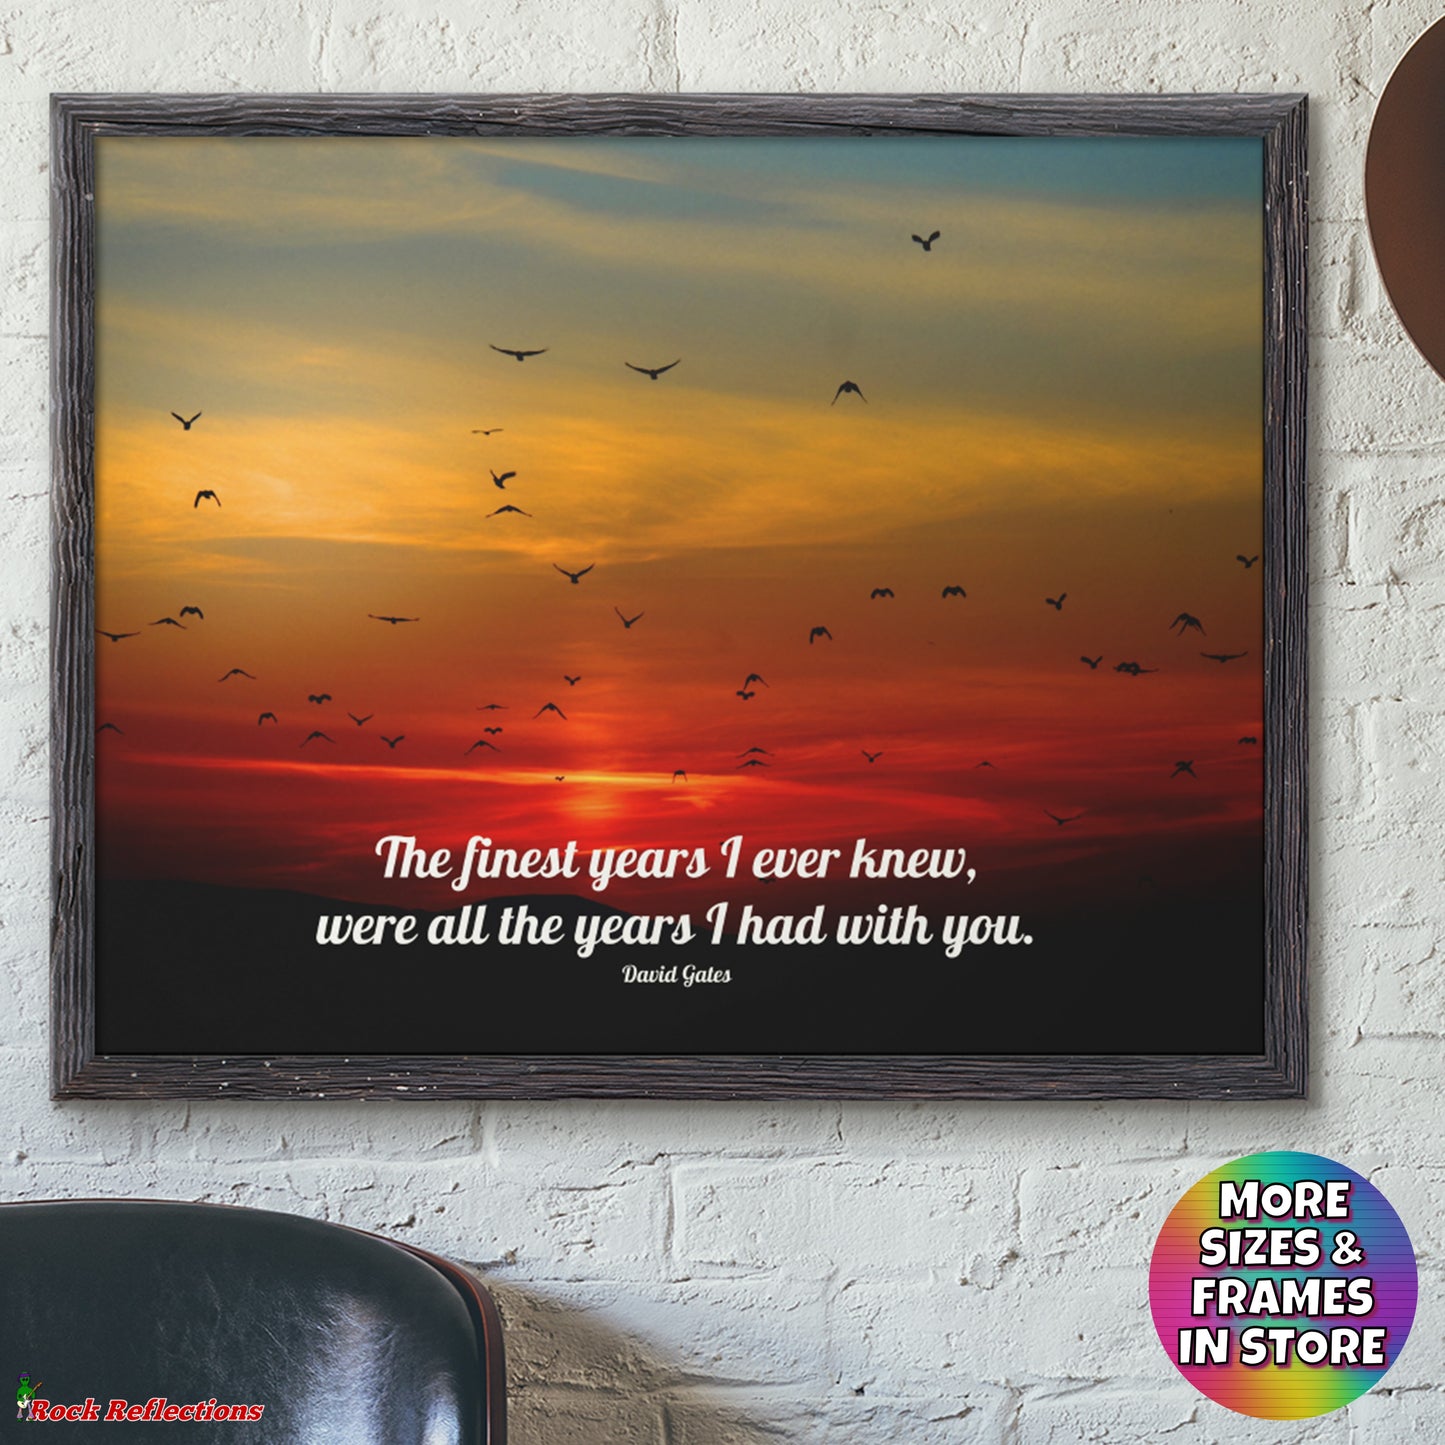 The Finest Years (2) - Music Quote Framed Print Gelato